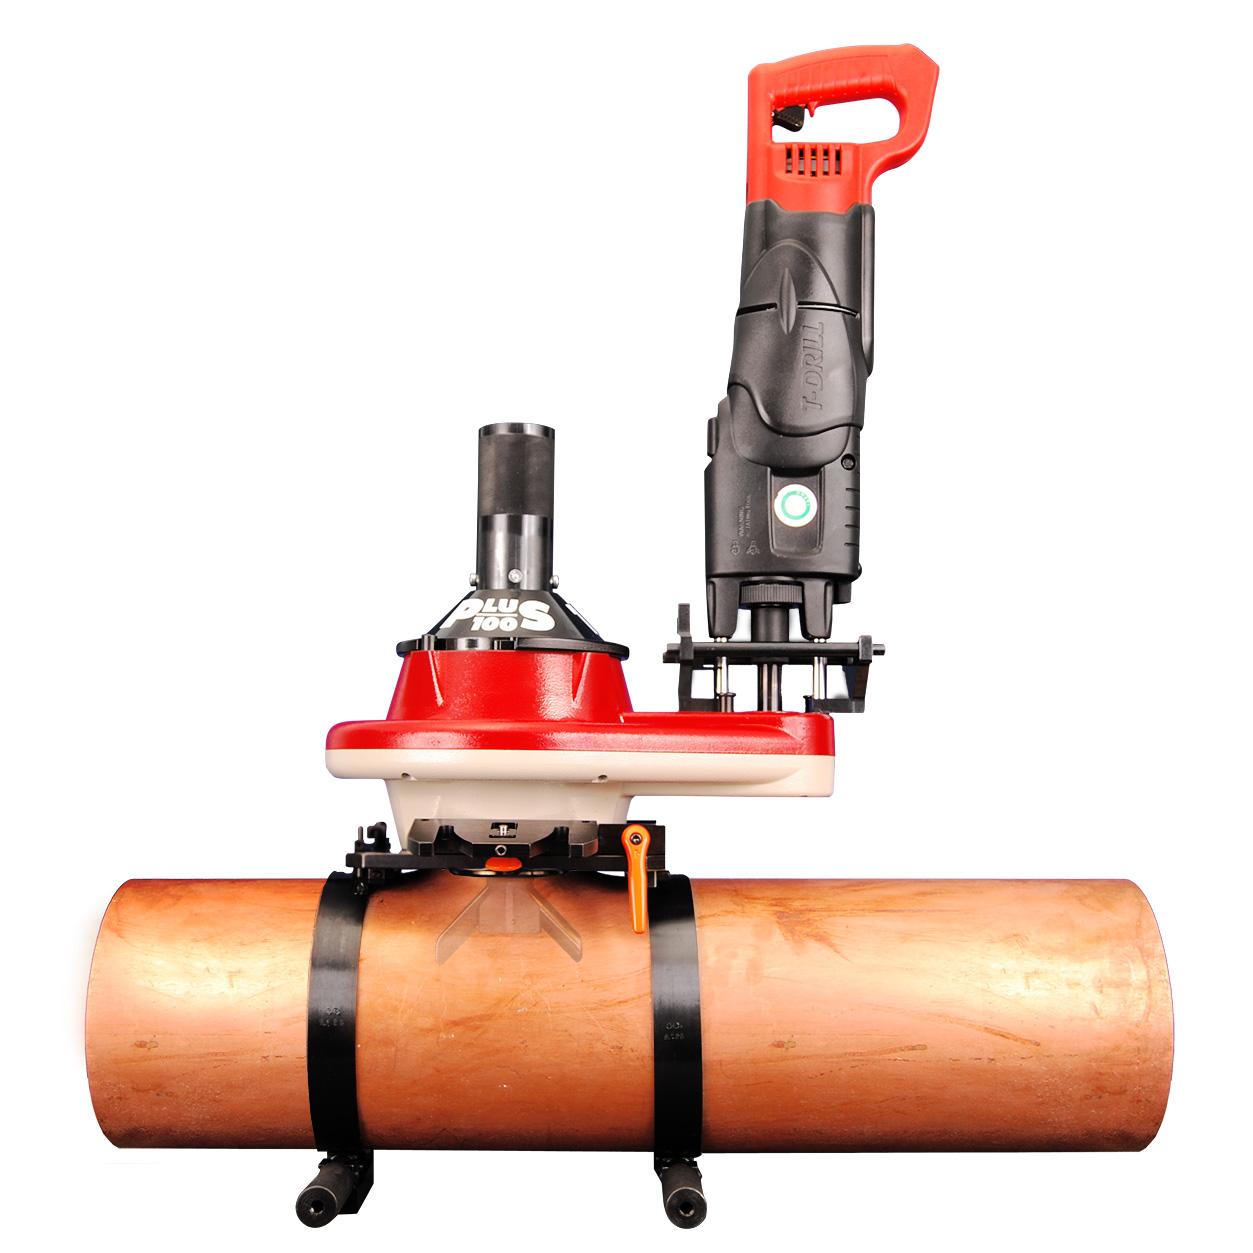 T-DRILL PLUS 115 CU Portable Collaring System for Copper tubes